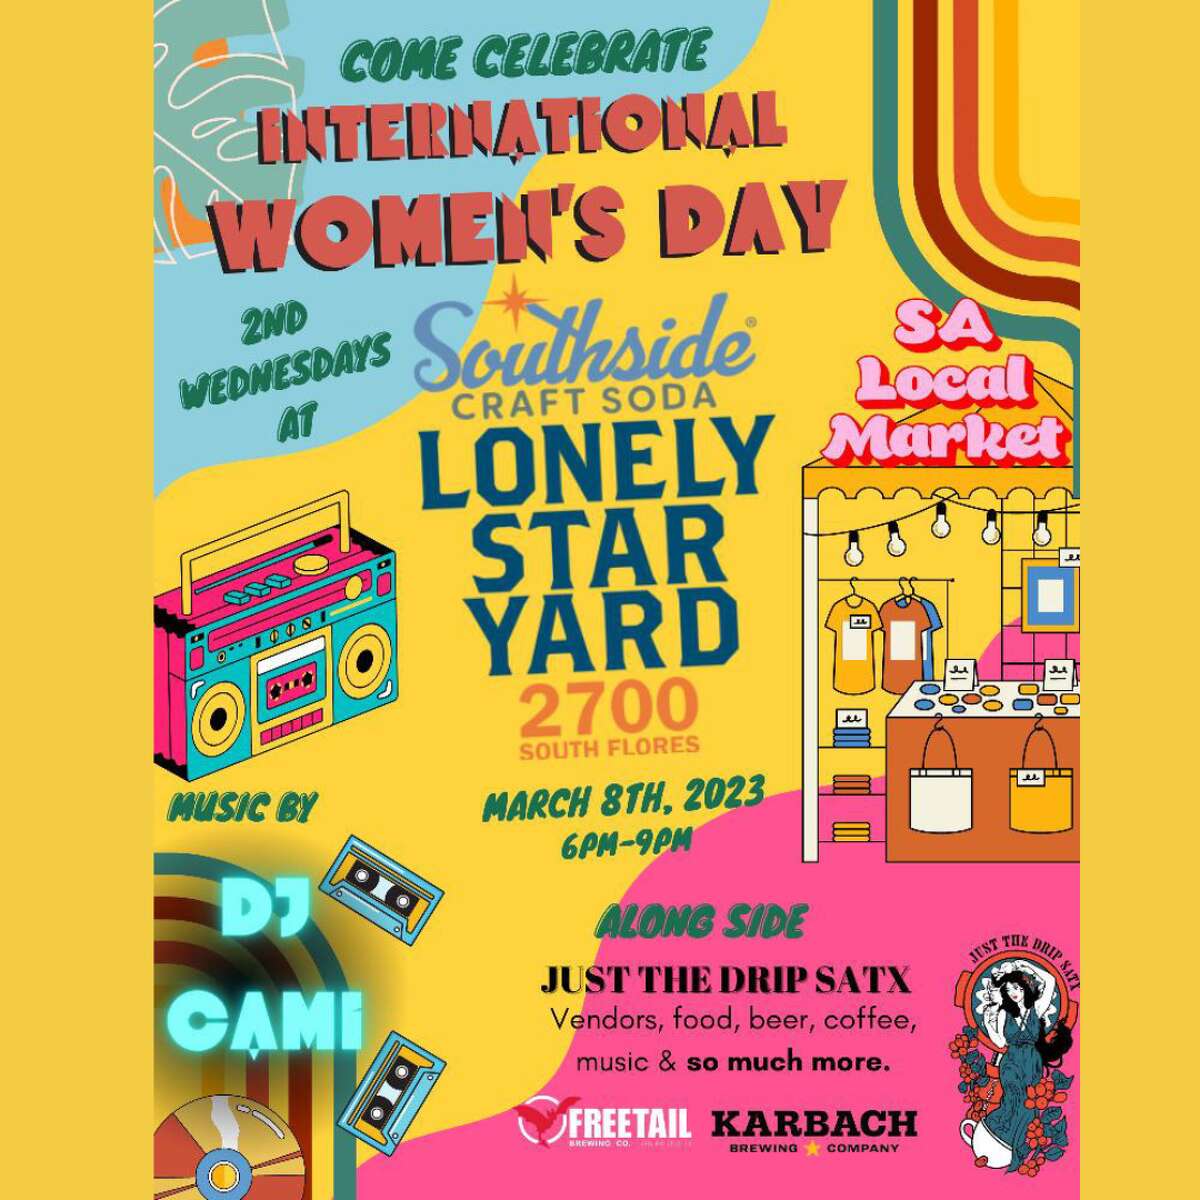 Celebrate International Women's Day at a free event hosted by Southside Craft Soda, Just the Drip Coffee, and SA Local Market.